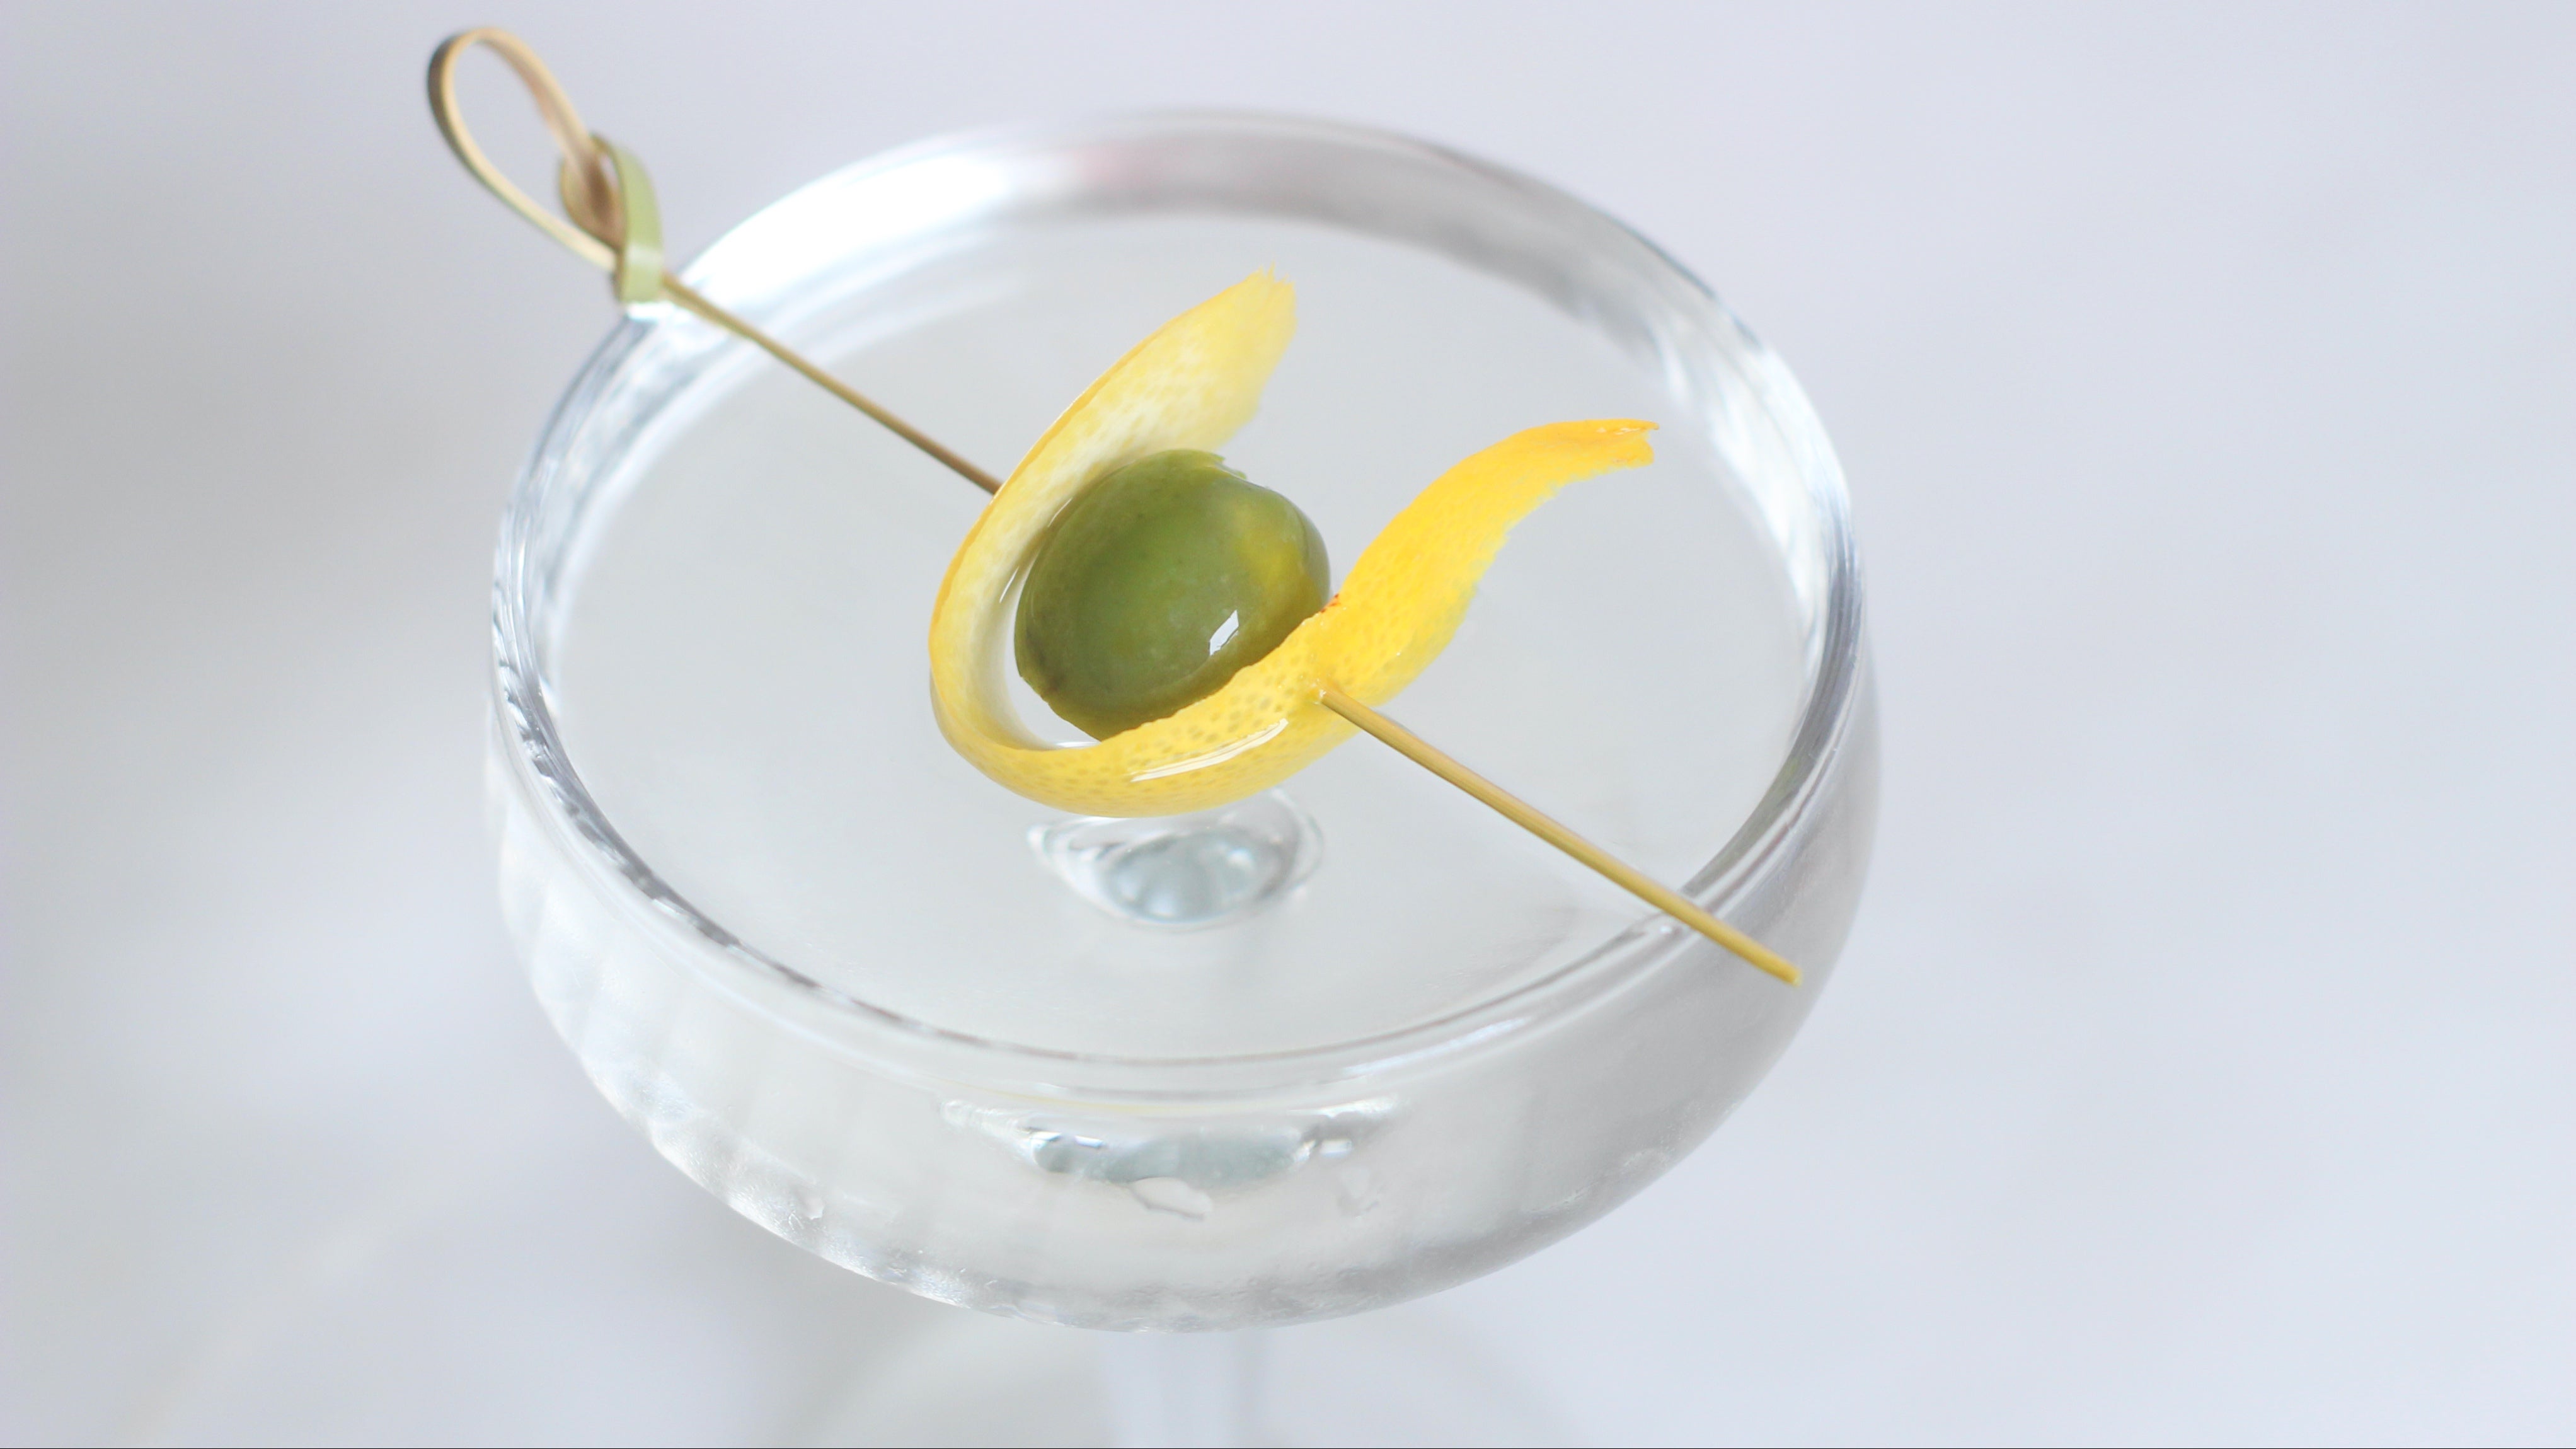 You Can Have All The Martini Garnishes At Once